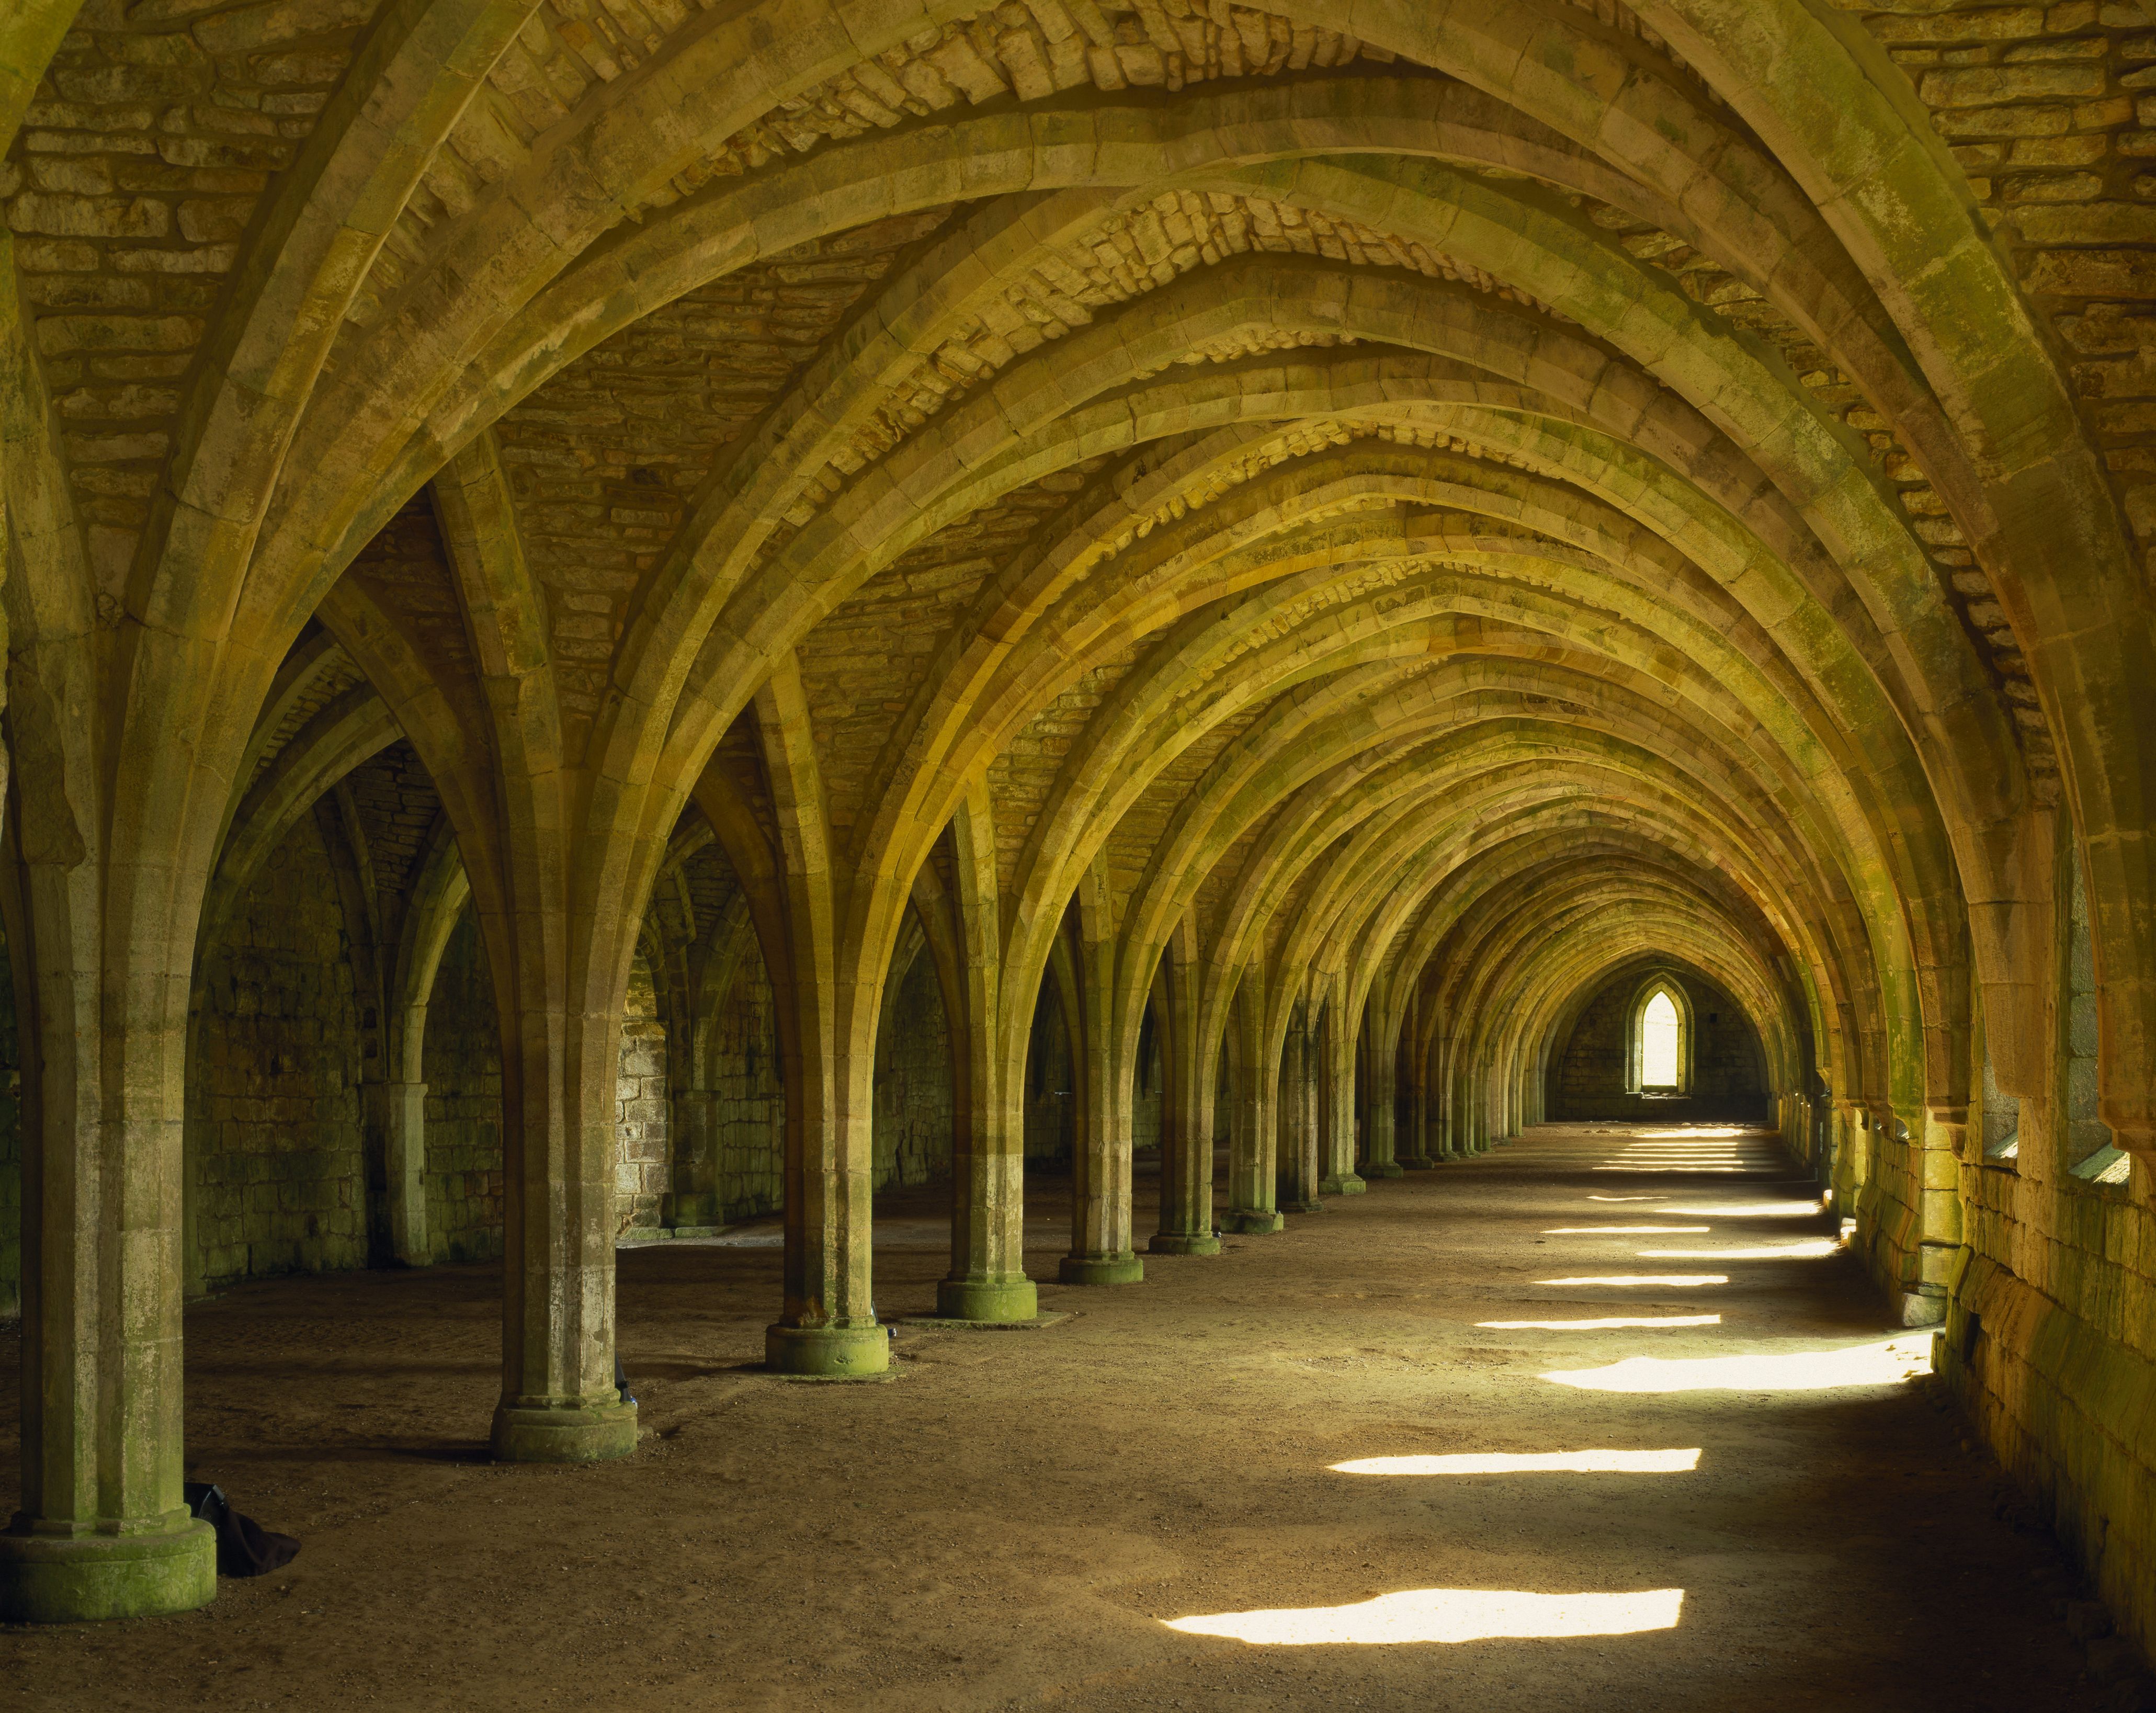 The magnificent West Range of the Cloisters at Fountains Abbey, North Yorkshire, containing the cellarium and lay brothers' refectory.